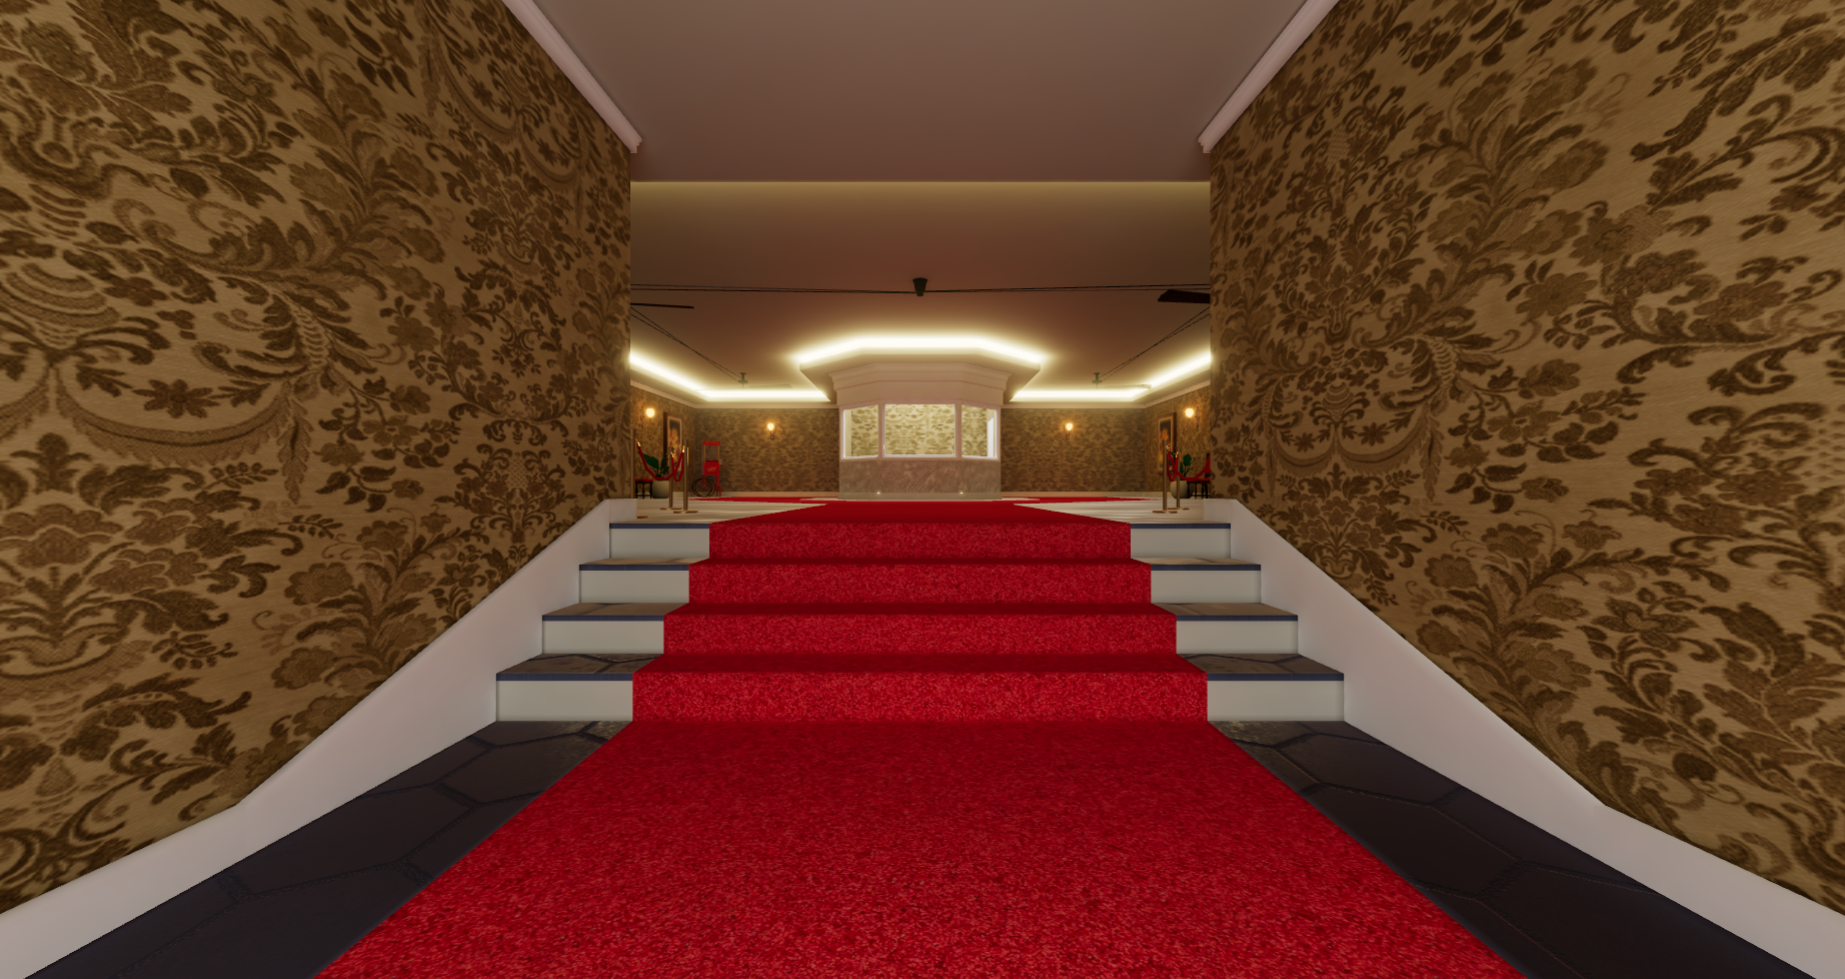 Wide view of the Hubs Classic Theater scene. Red carpet lines stairs that go up. A ticket booth can be scene ahead. The interior is wallpapered and opulent.